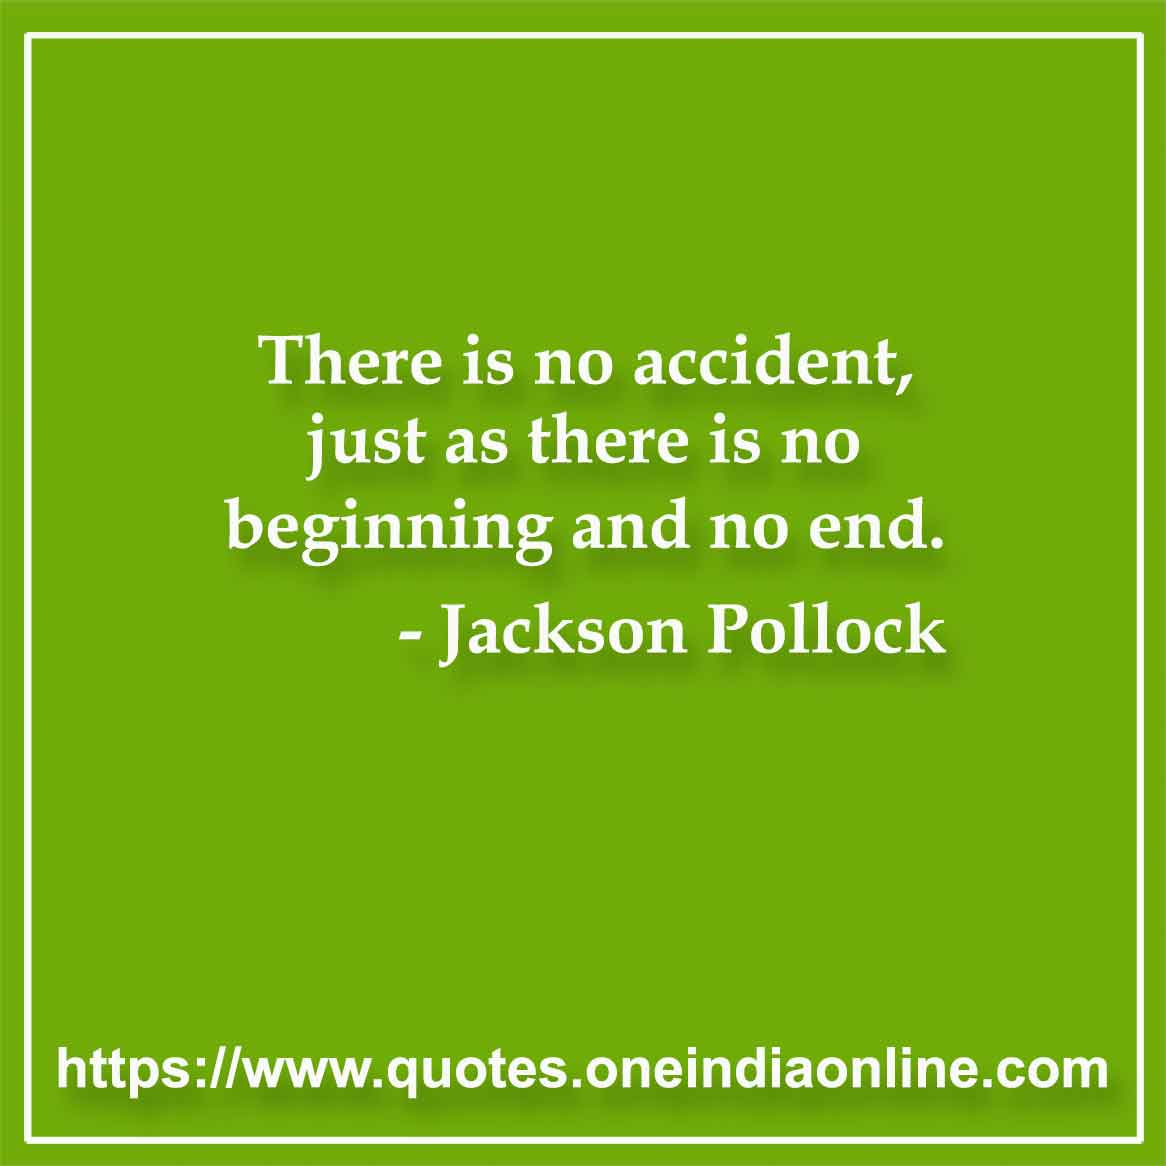 There is no accident, just as there is no beginning and no end. 

- Jackson Pollock